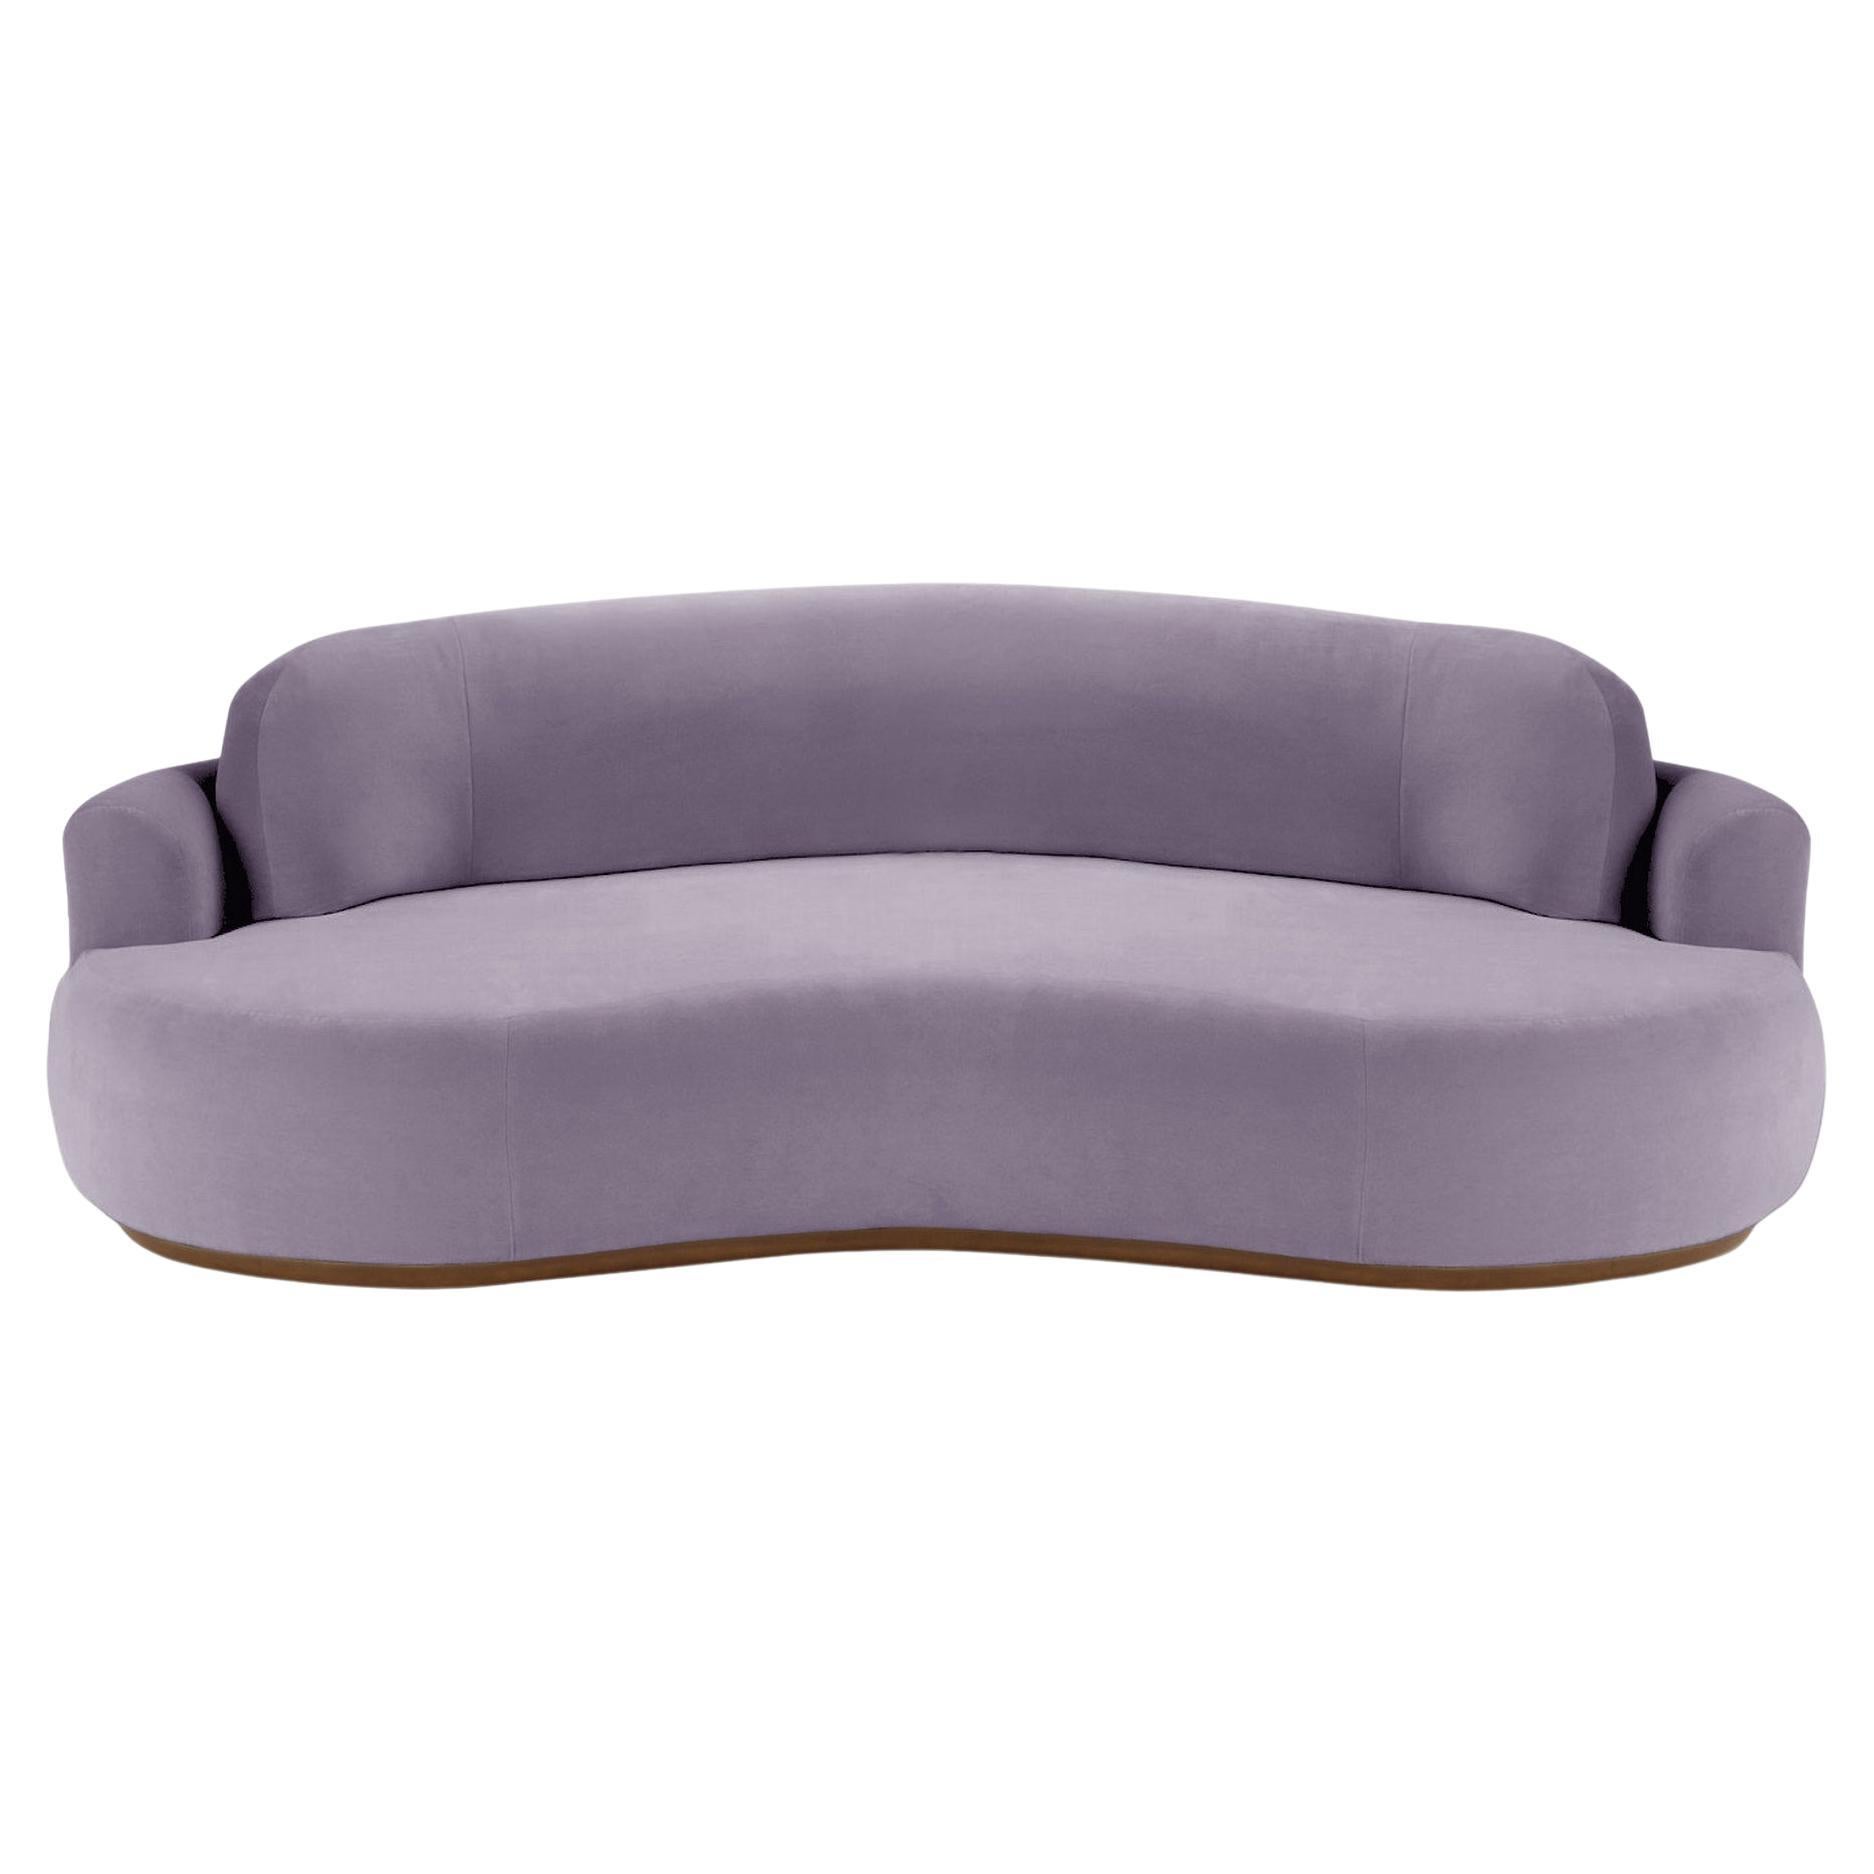 Naked Round Sofa, Large with Beech Ash-056-1 and Paris Lavanda